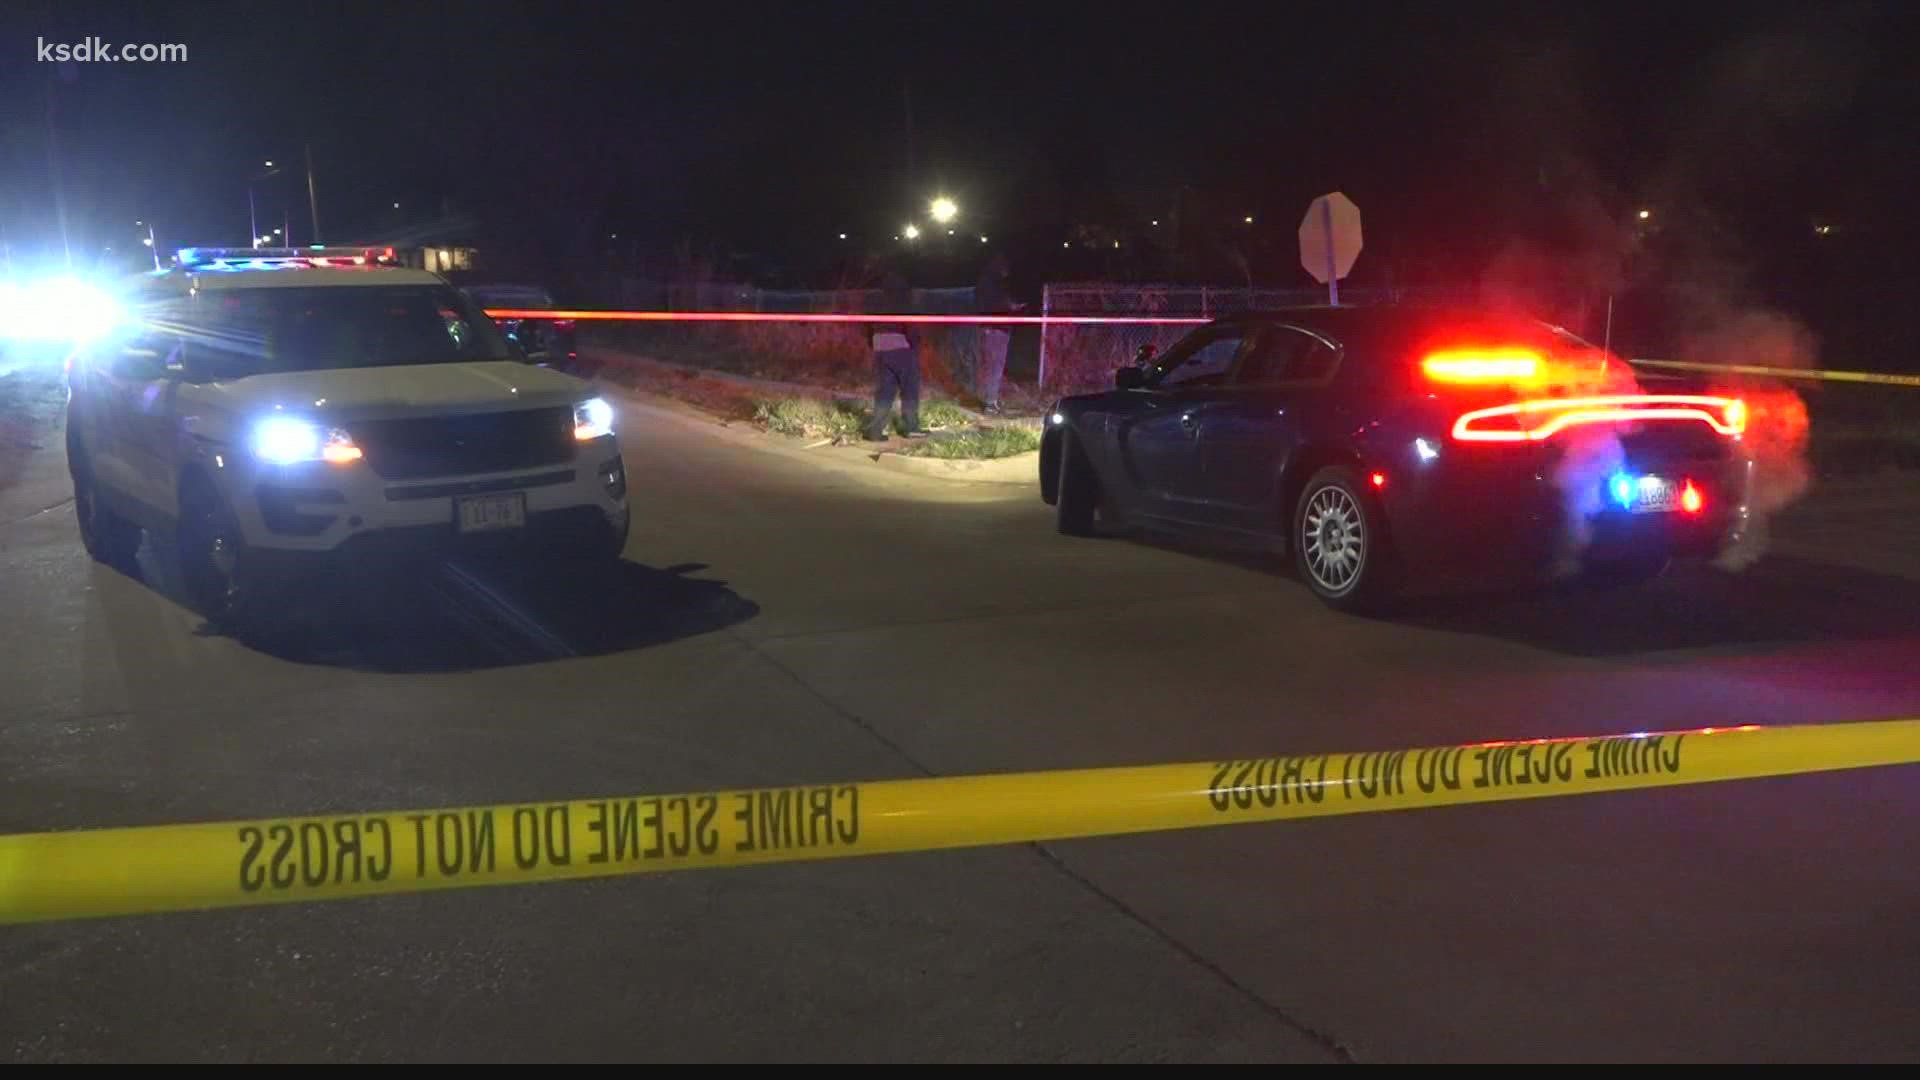 Police are investigating after a body was found in East St. Louis. The body was found in the middle of the road along Trendley Avenue and 15th Street.